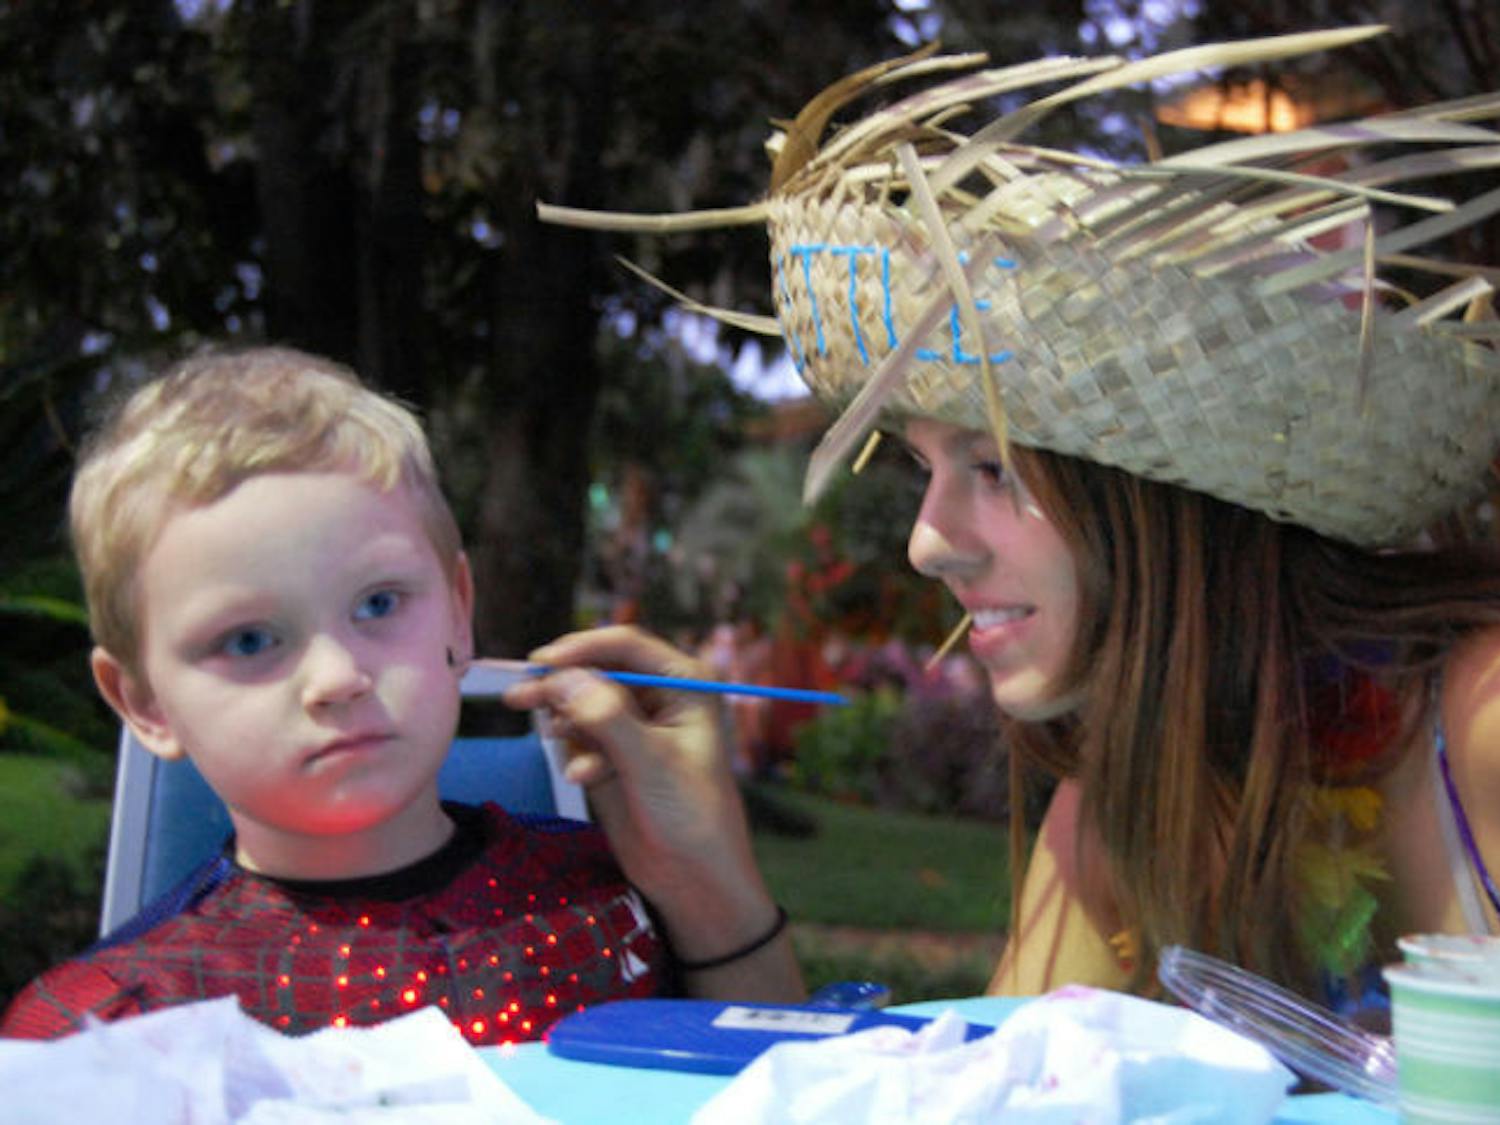 UF nursing freshman Brittany Reeser, 18, paints a spider on 3-year-old Jacob Rowland’s cheek Thursday in front of the Alpha Delta Pi house. The face-painting was a part of Ghouls, Goblins and Greeks held on Sorority Row for children.